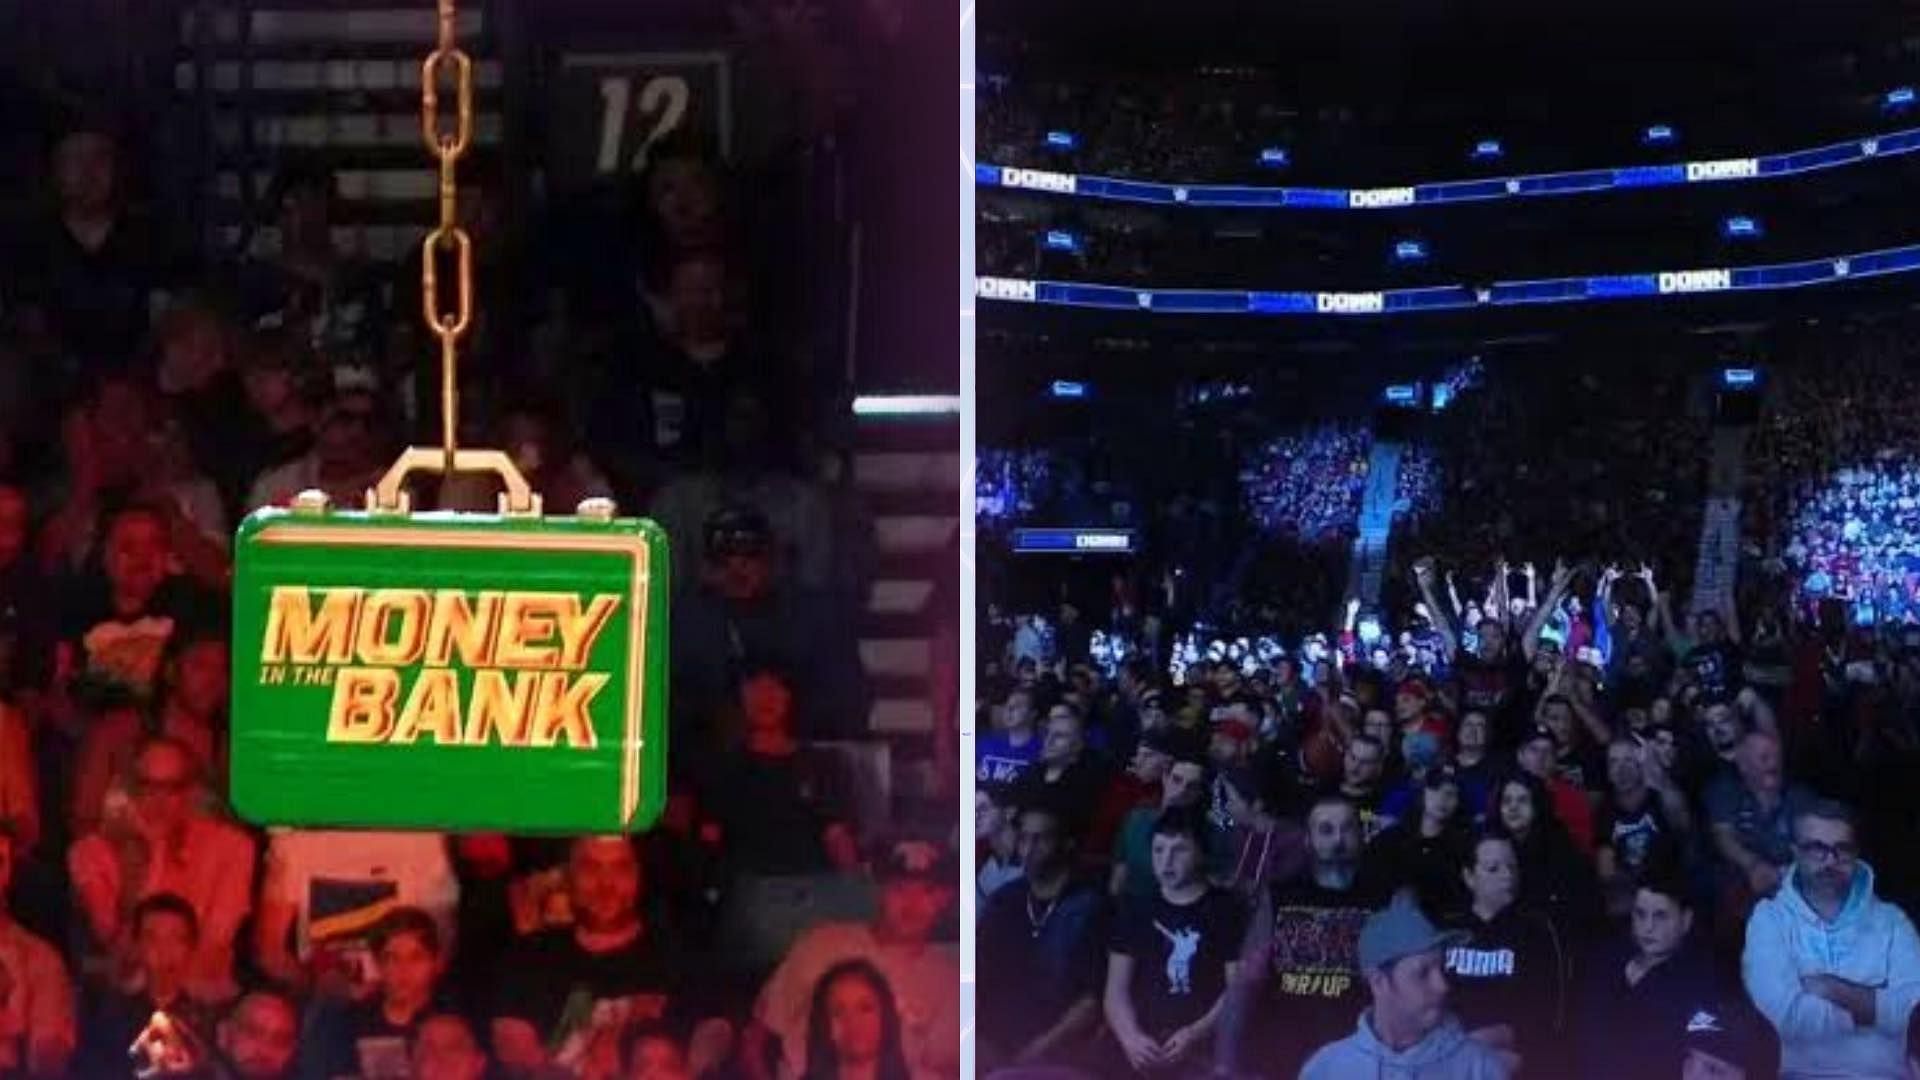 A failed MITB attempt was witnessed on WWE SmackDown.